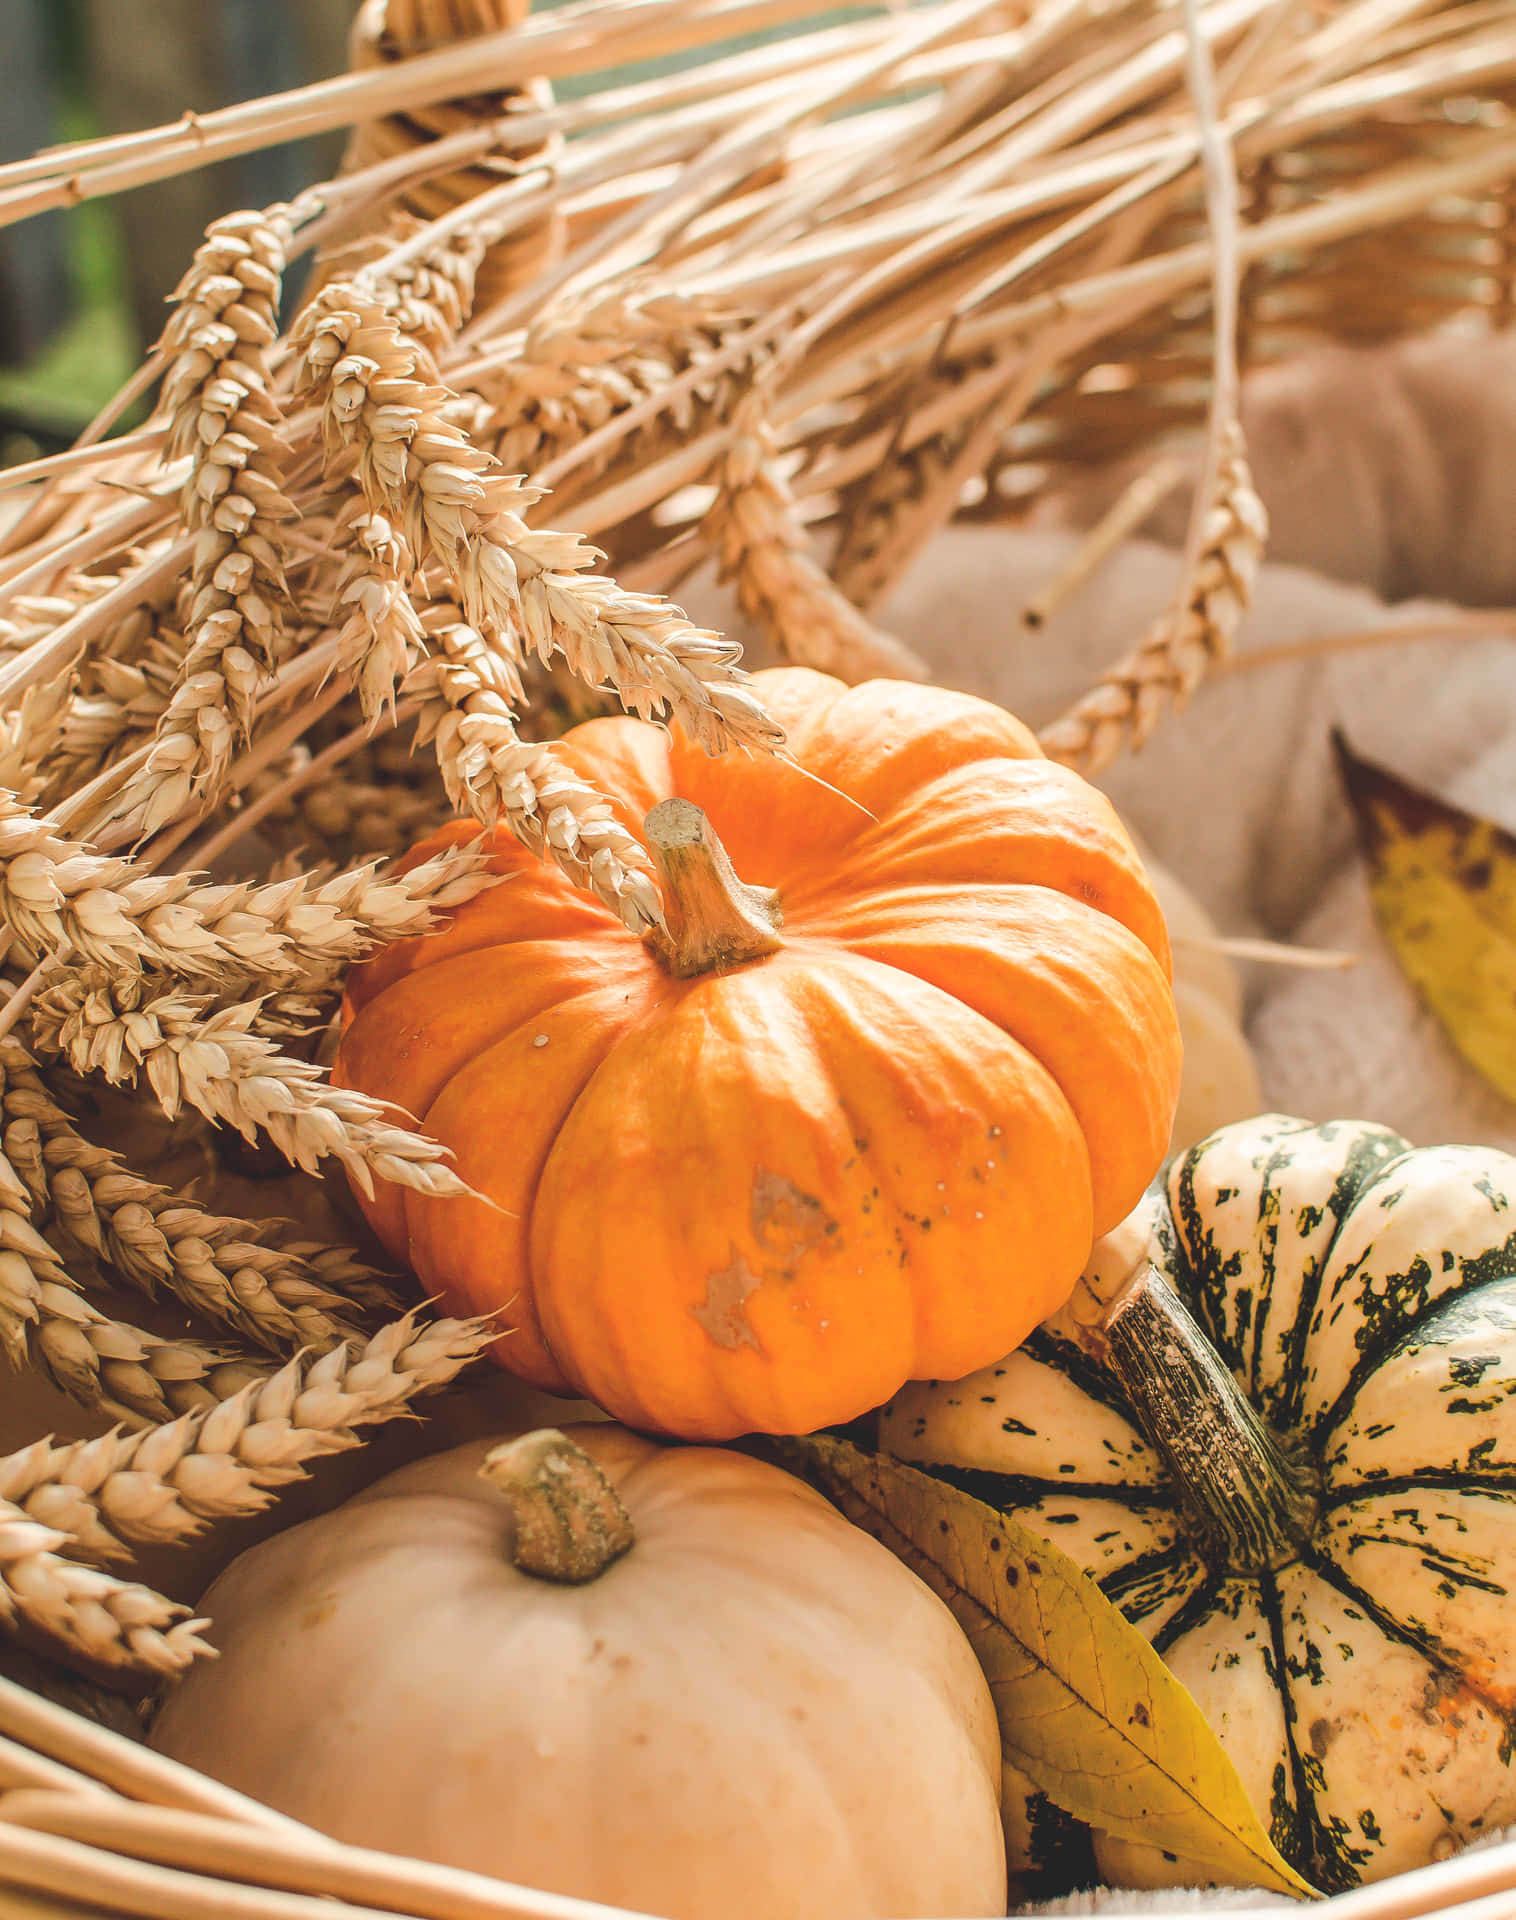 A Basket Filled With Pumpkins And Wheat